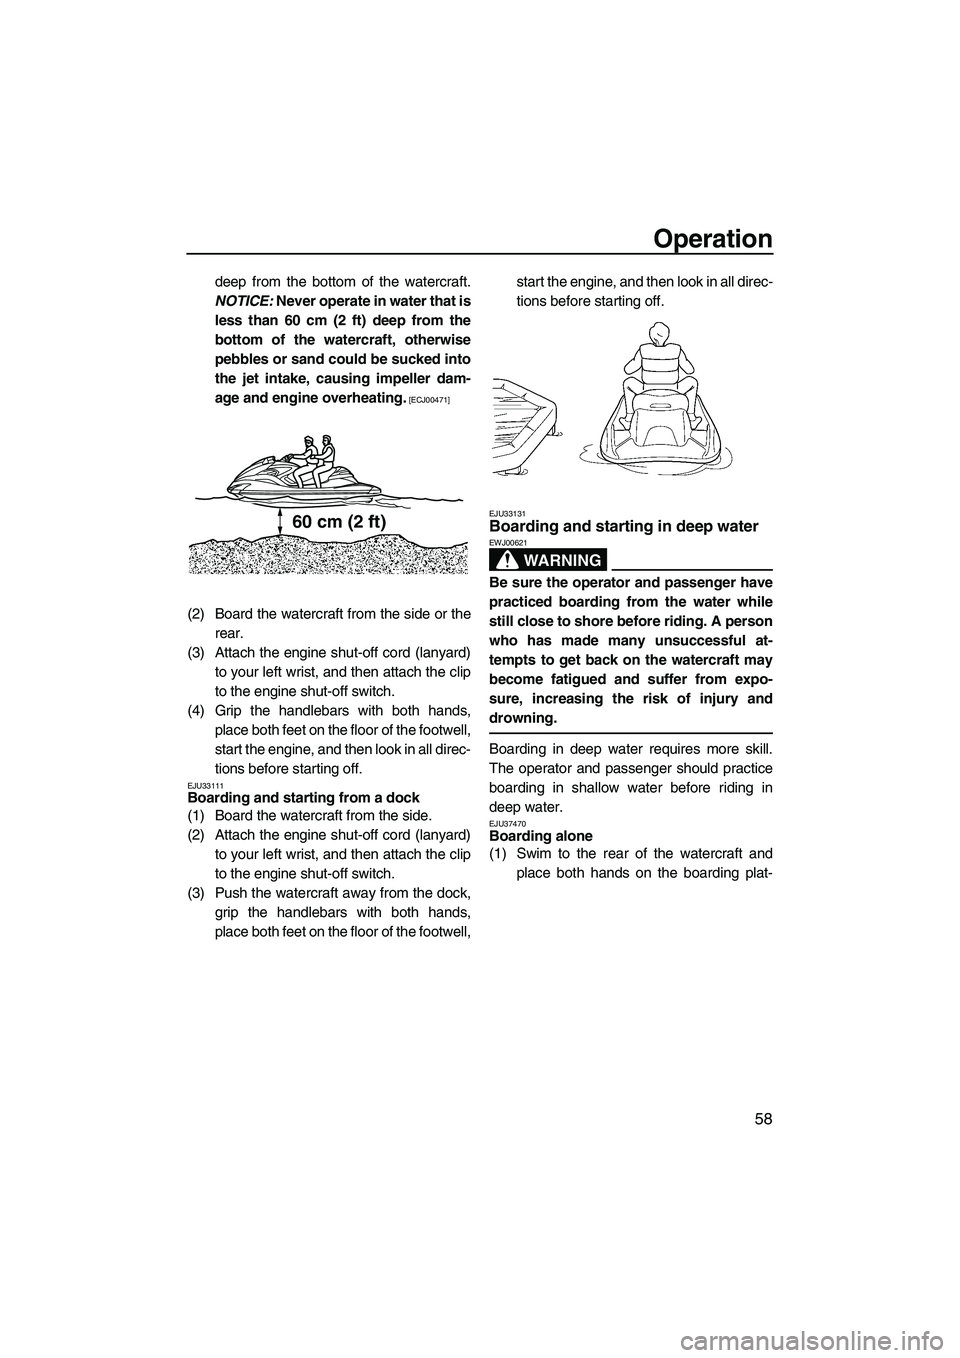 YAMAHA FZR 2009  Owners Manual Operation
58
deep from the bottom of the watercraft.
NOTICE: Never operate in water that is
less than 60 cm (2 ft) deep from the
bottom of the watercraft, otherwise
pebbles or sand could be sucked int